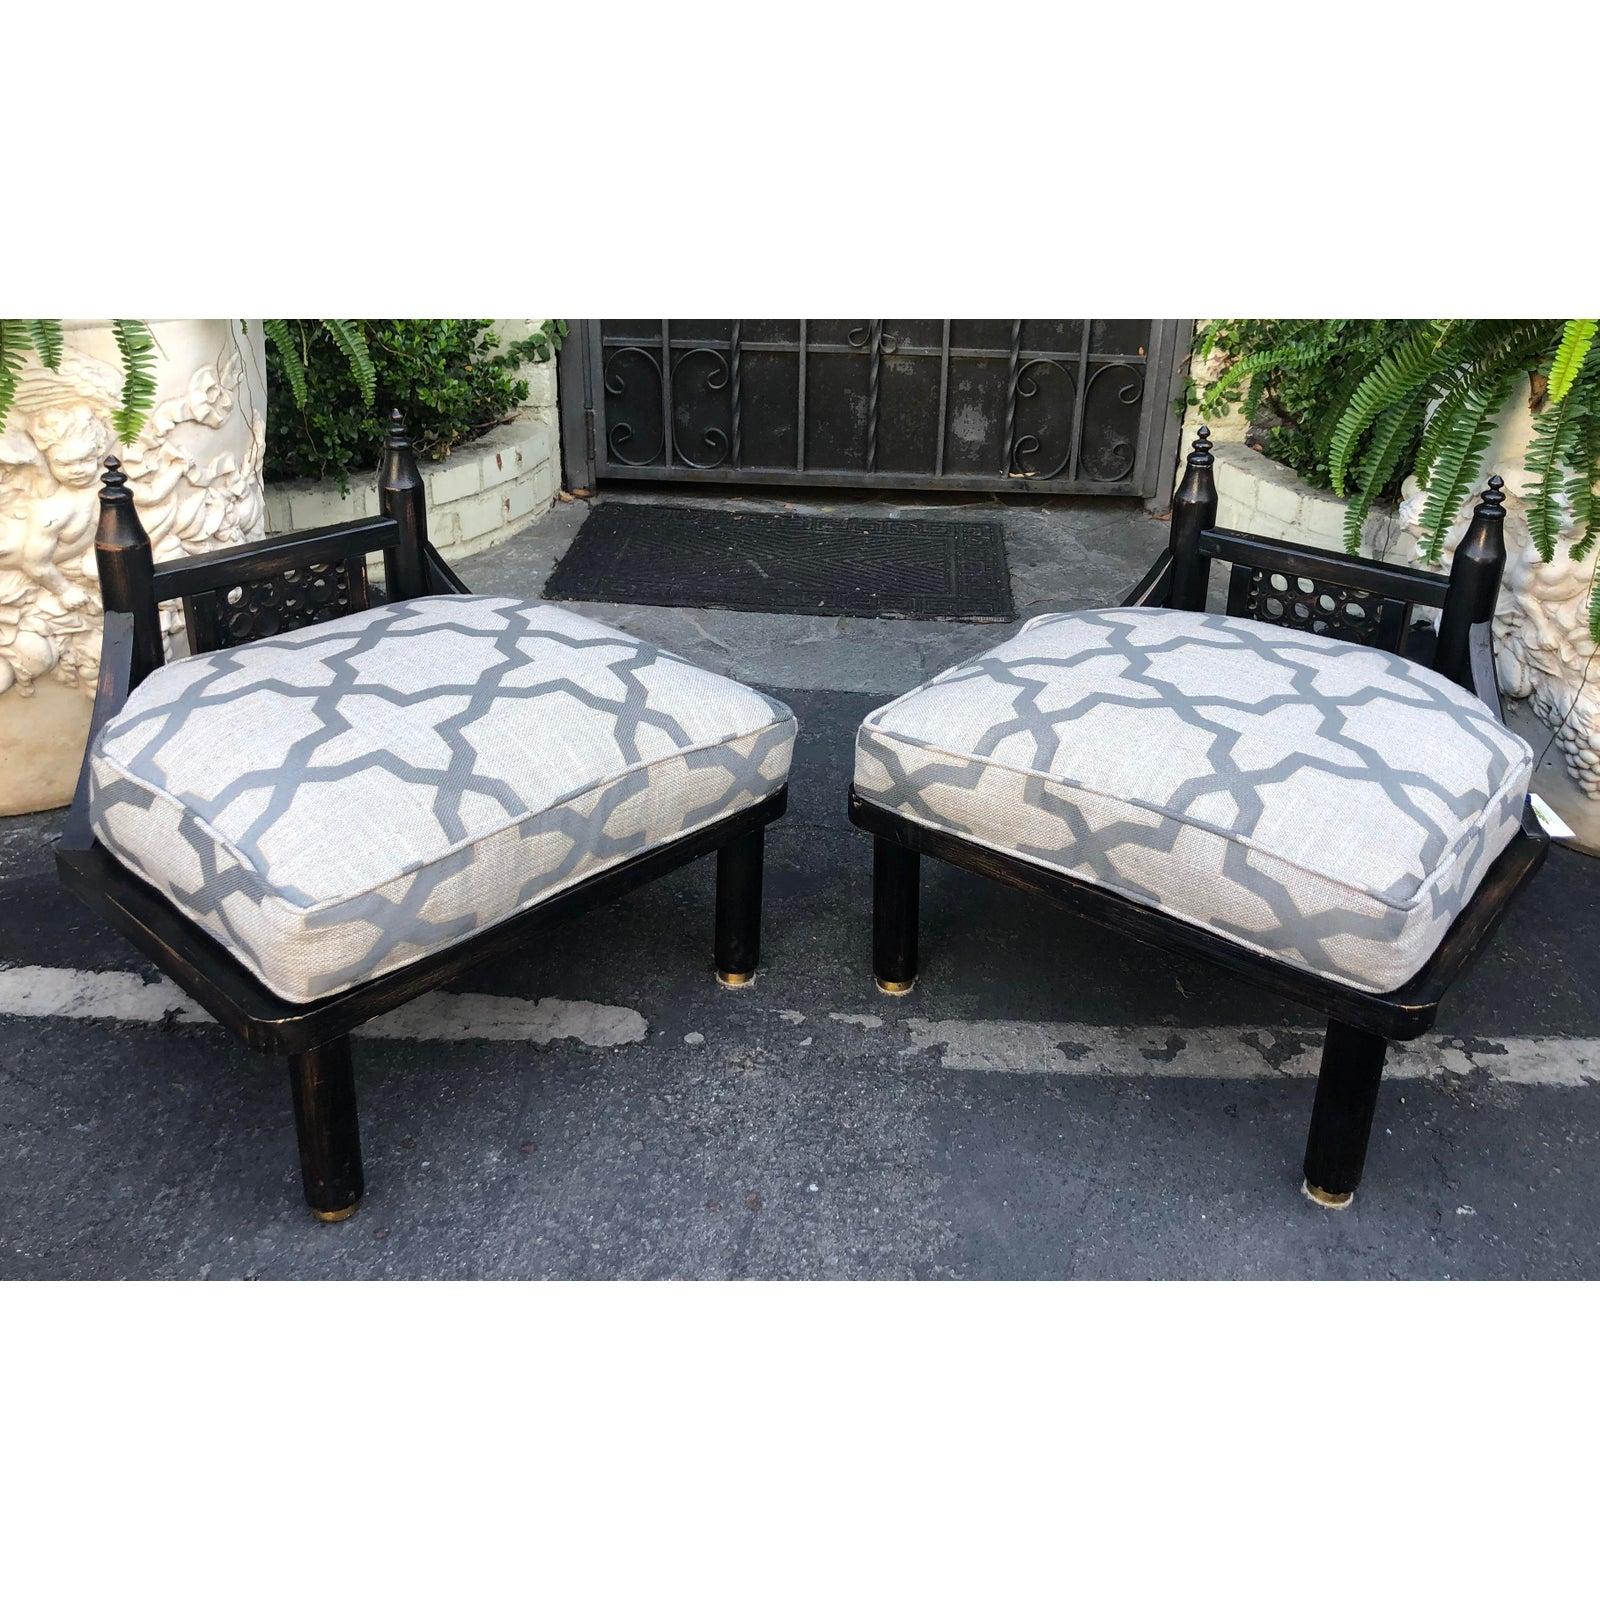 American Unusual Vintage Ritts Co. Mid-Century Modern Black Chinoiserie Low Chairs